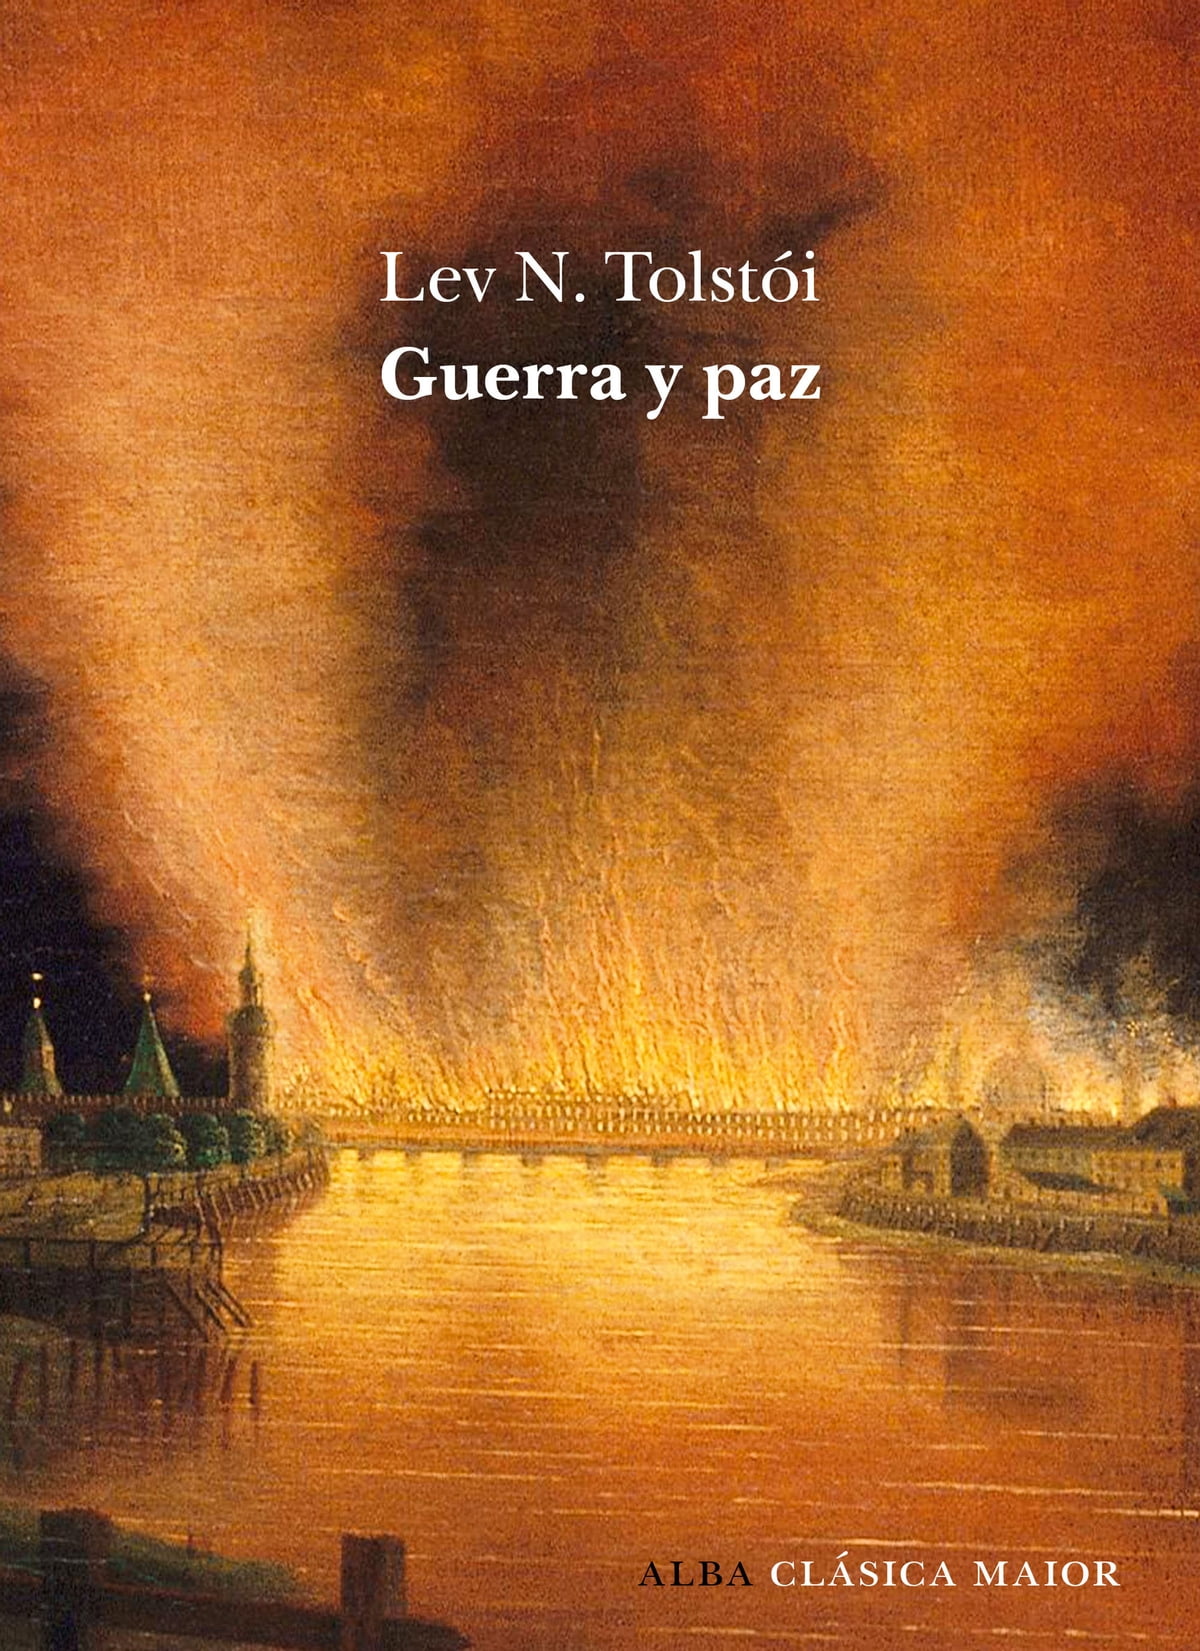 "War and Peace" by Leo Tolstoy